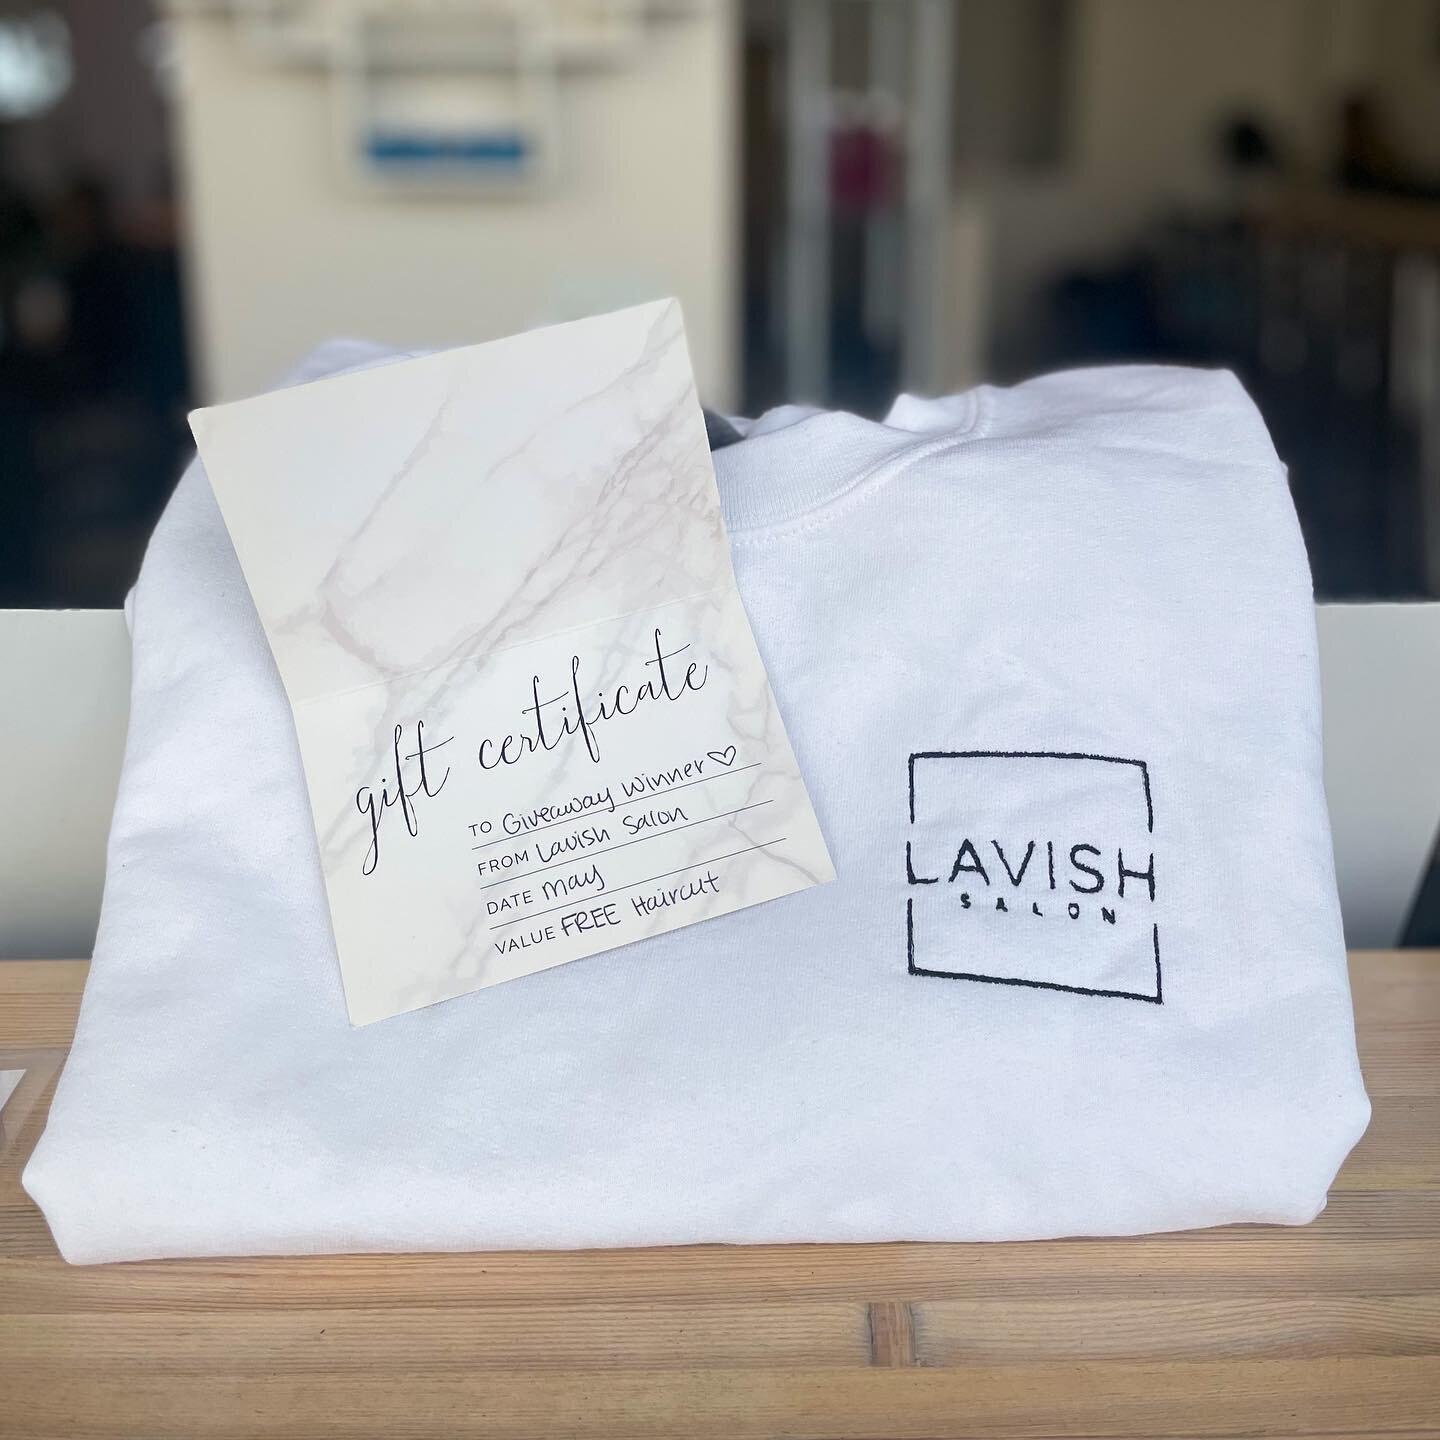 💕MAY GIVEAWAY💕

Win a custom Lavish sweatshirt &amp; a FREE haircut! 

Requirements:
1. Like this post &amp; follow @lavishspokane
2. Like all of our posts in the month of May
3. Post this post on your Insta story and tag us for an extra entry! 
4.